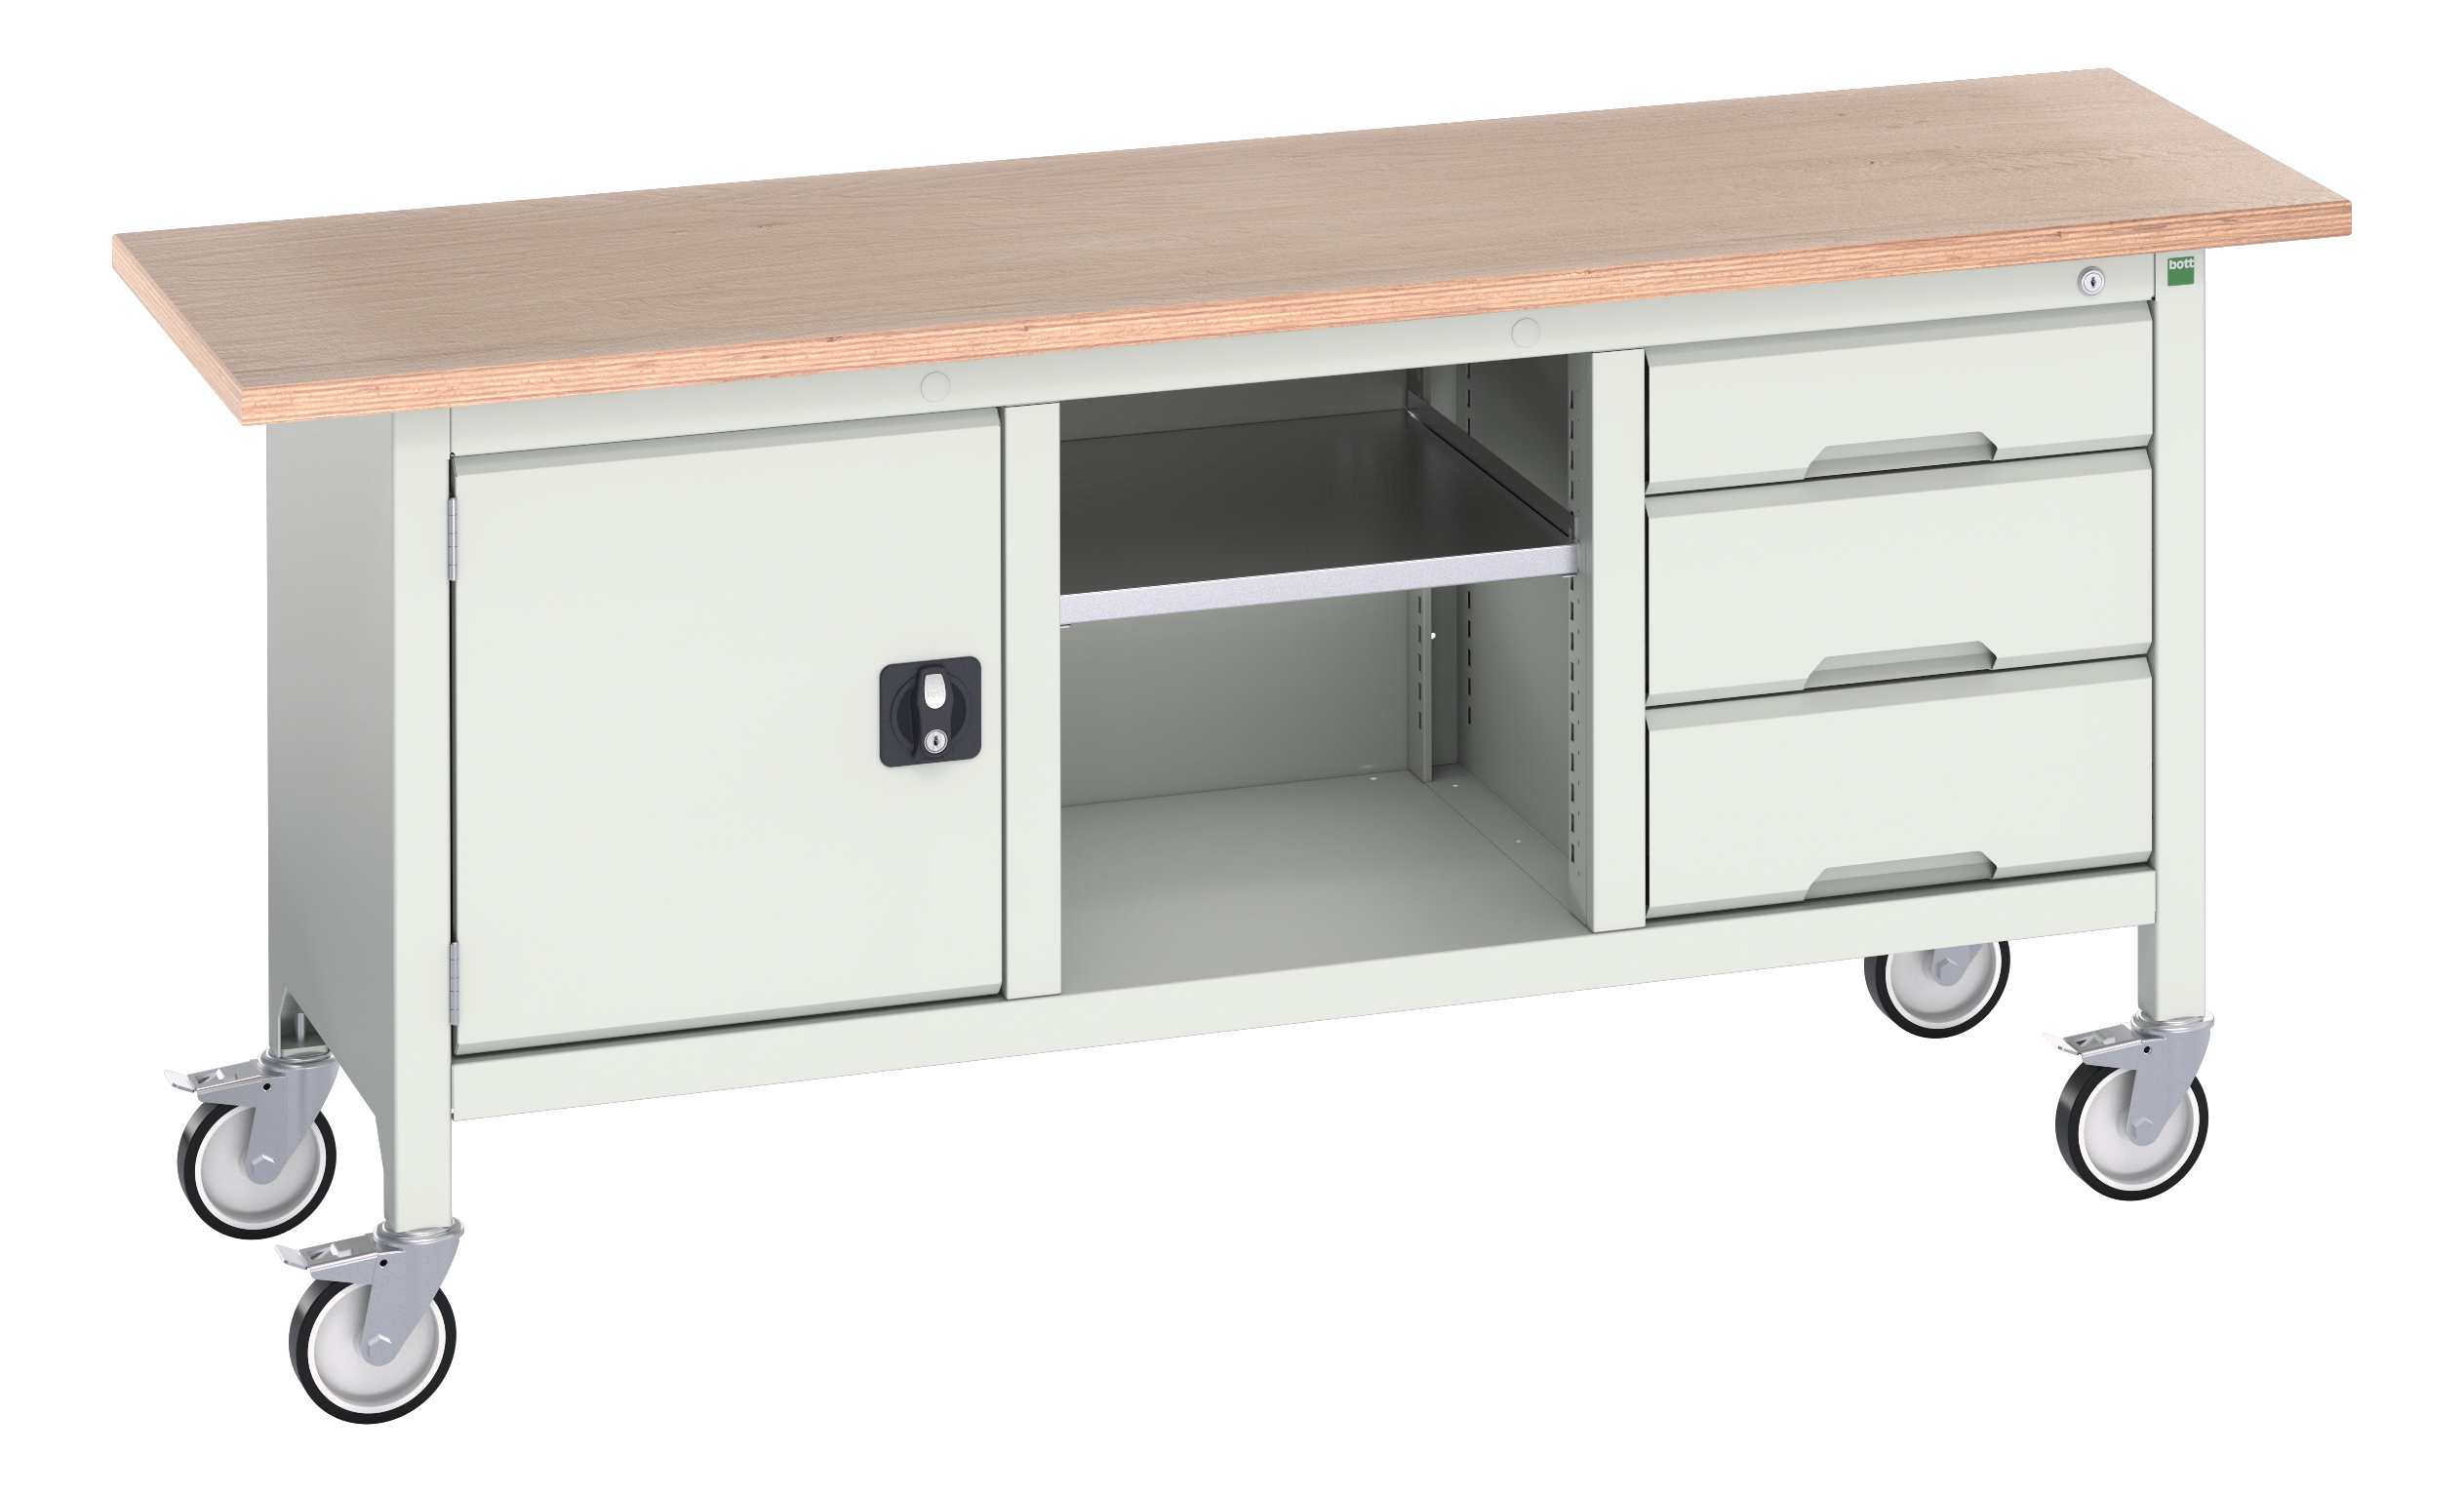 Bott Verso Mobile Storage Bench With Full Cupboard / Open Cupboard / 3 Drawer Cab - 16923220.16